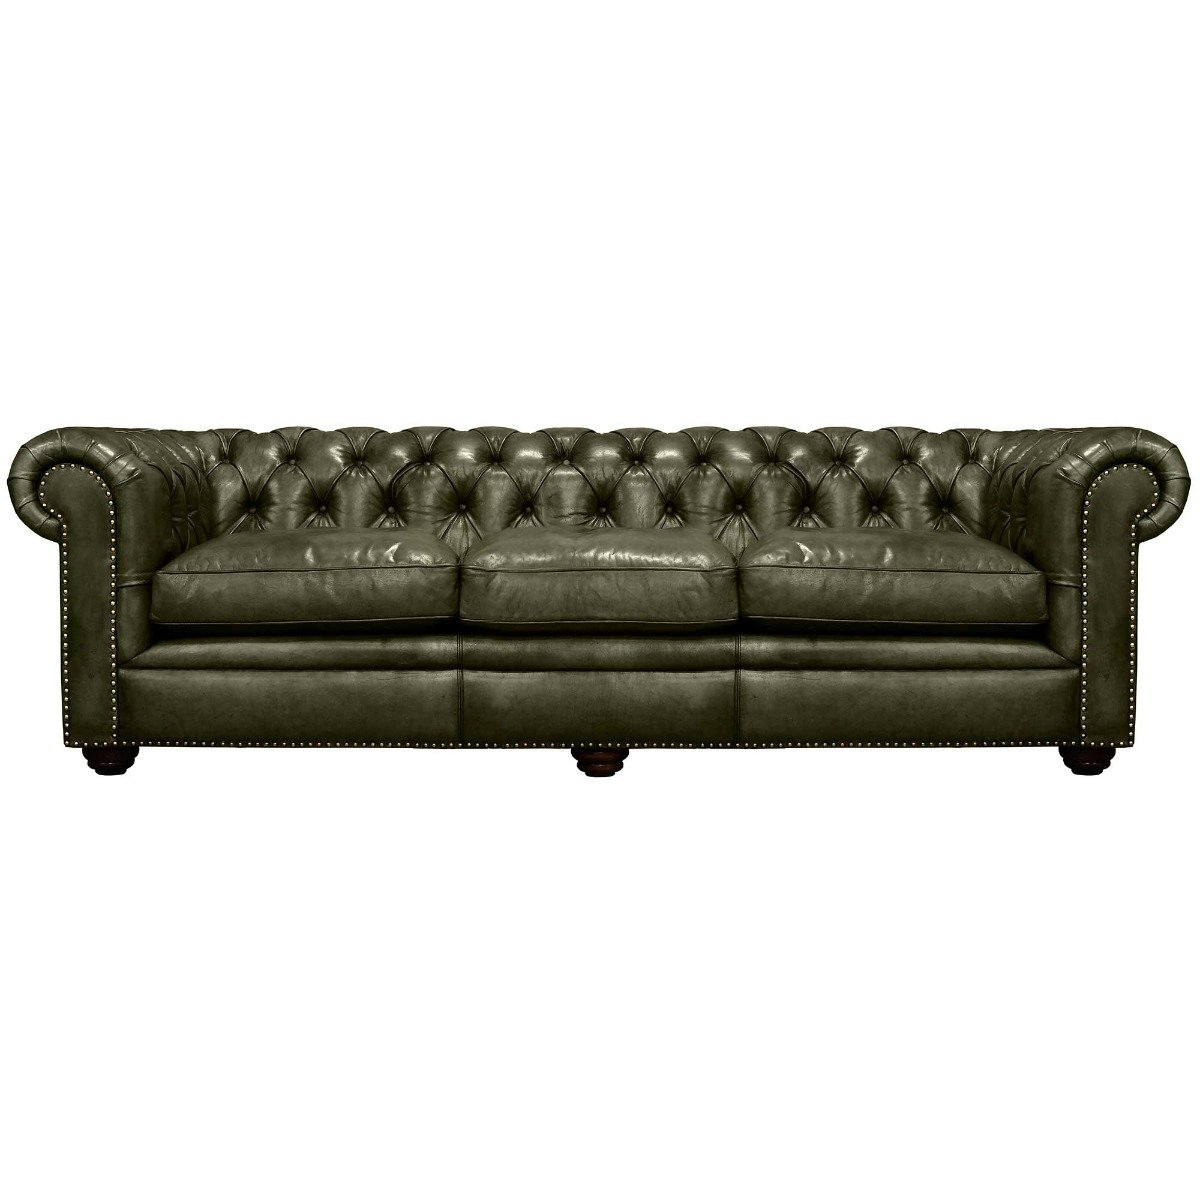 Pure Furniture Winslow Chesterfield Sofa 280cm With Wooden Legs, Green Leather | Barker & Stonehouse